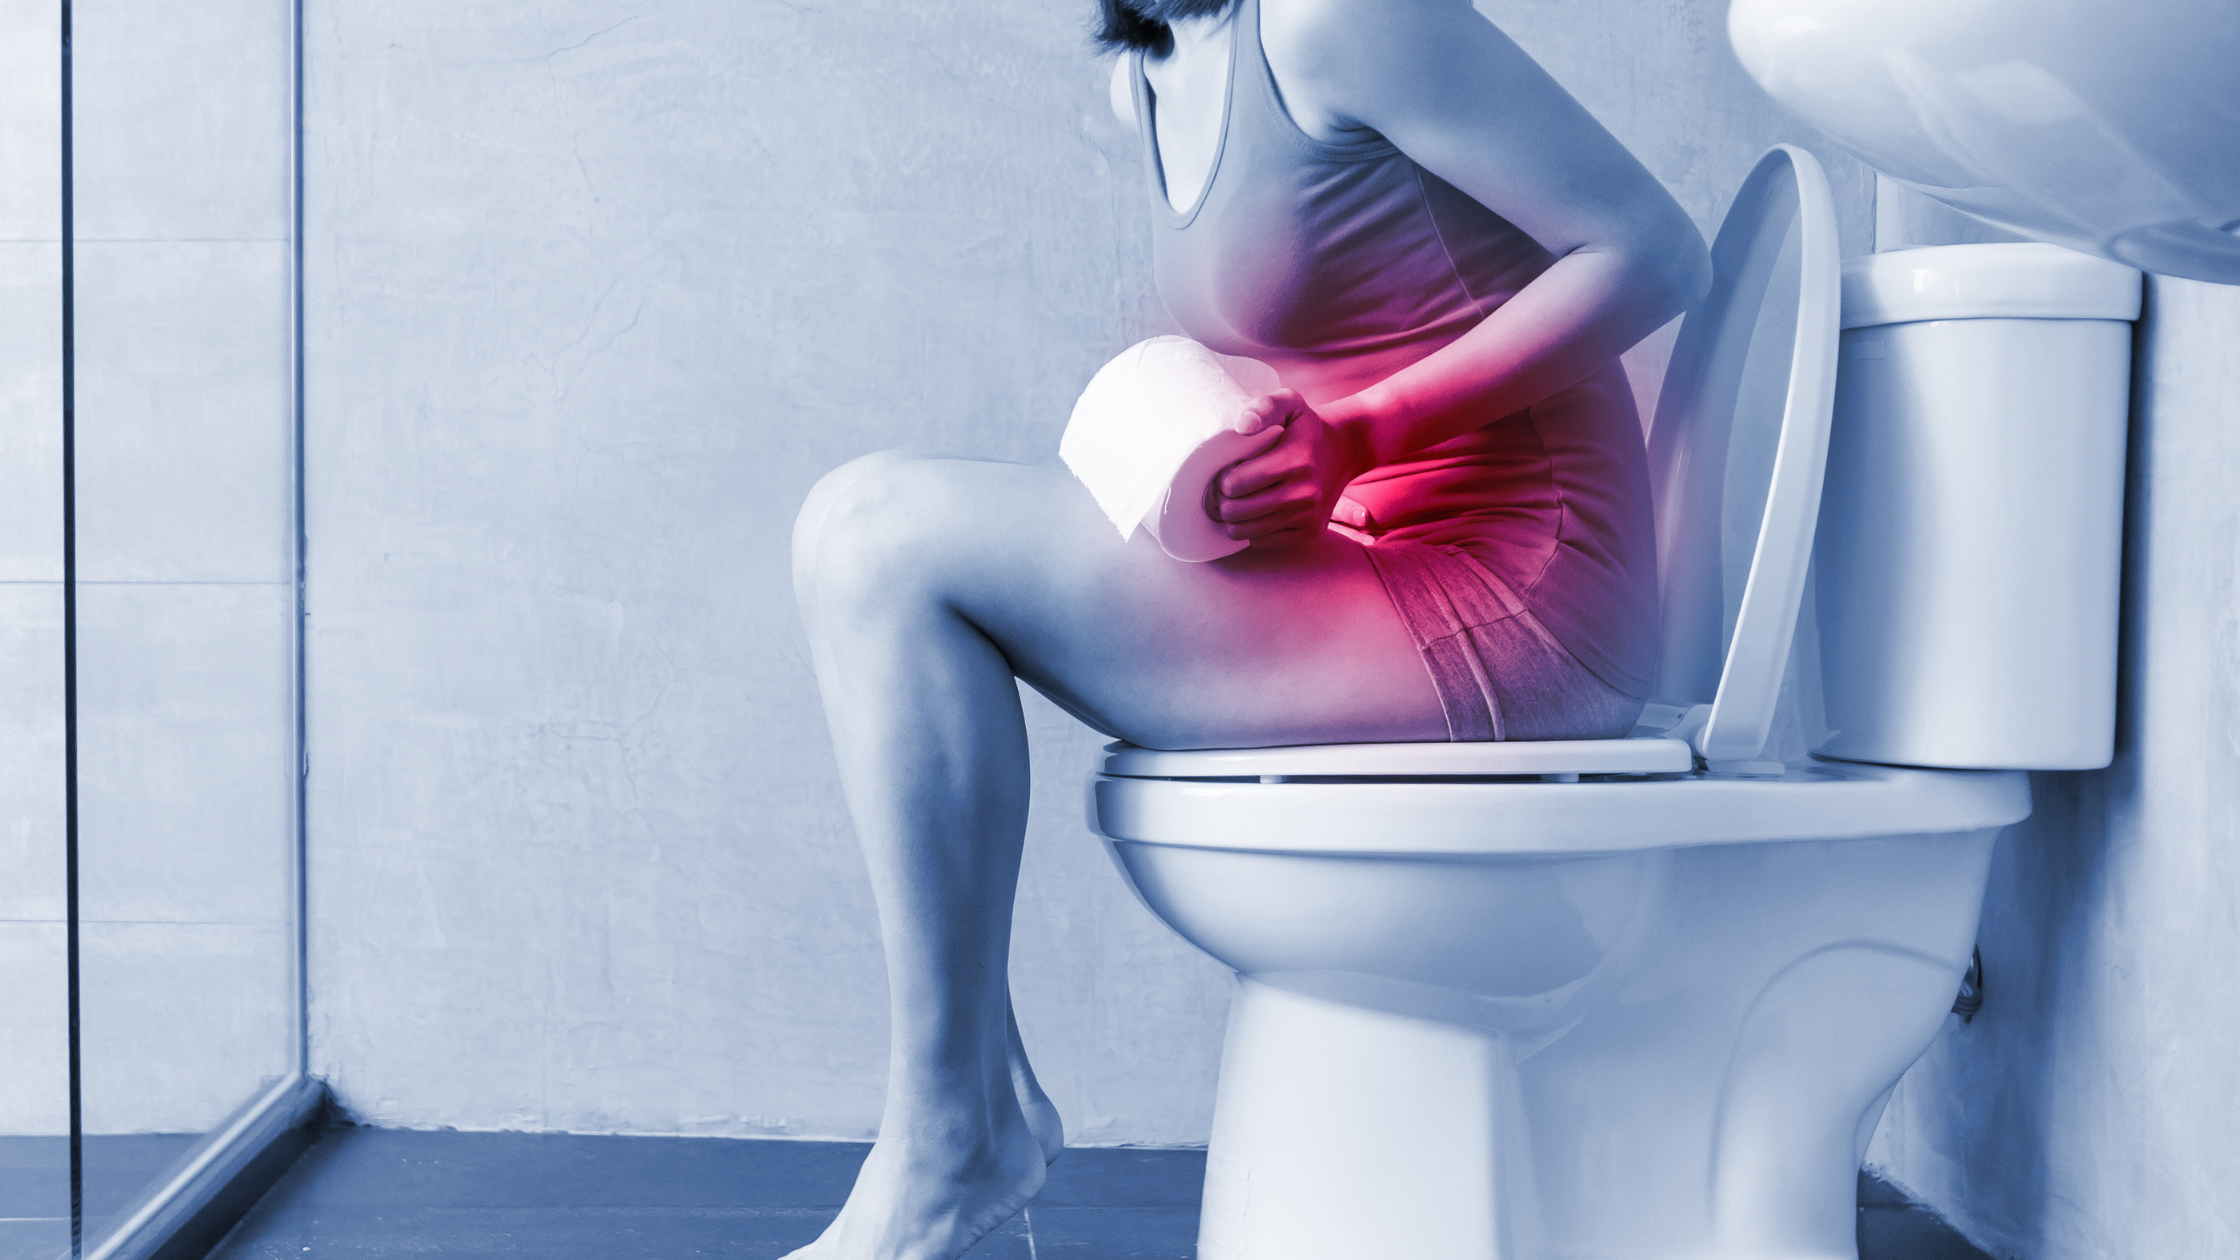 woman sitting on the toilet, stomach glowing red in pain